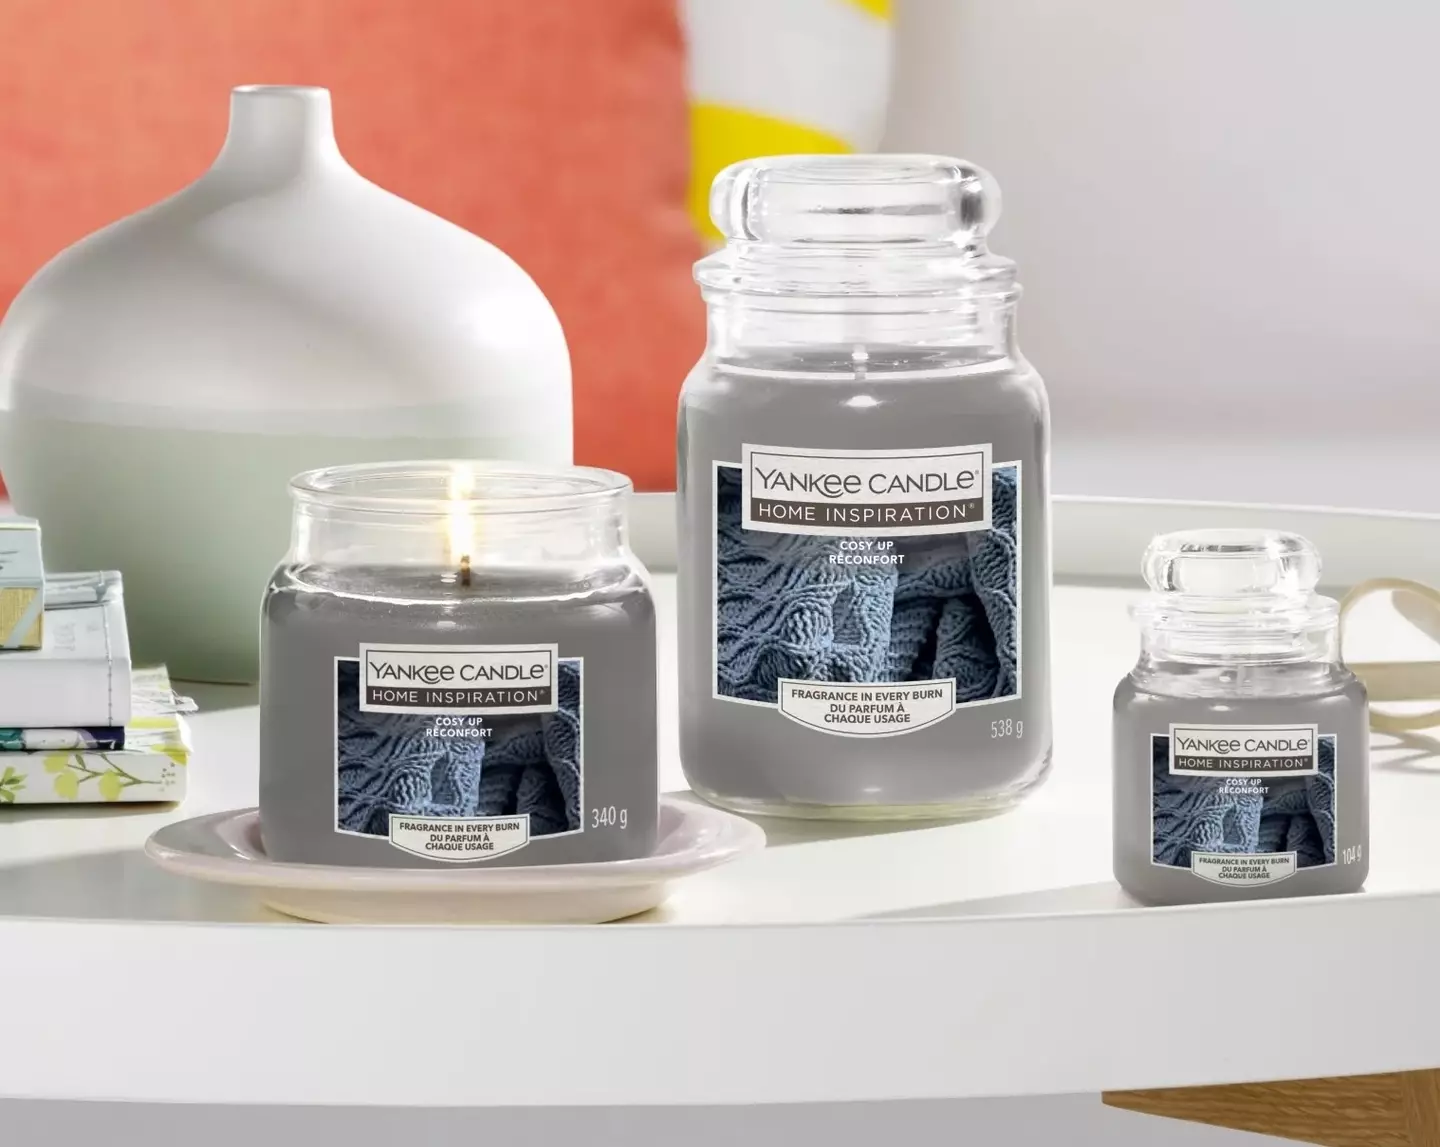 Yankee Candle's 'Home Inspiration' label has finally been explained.